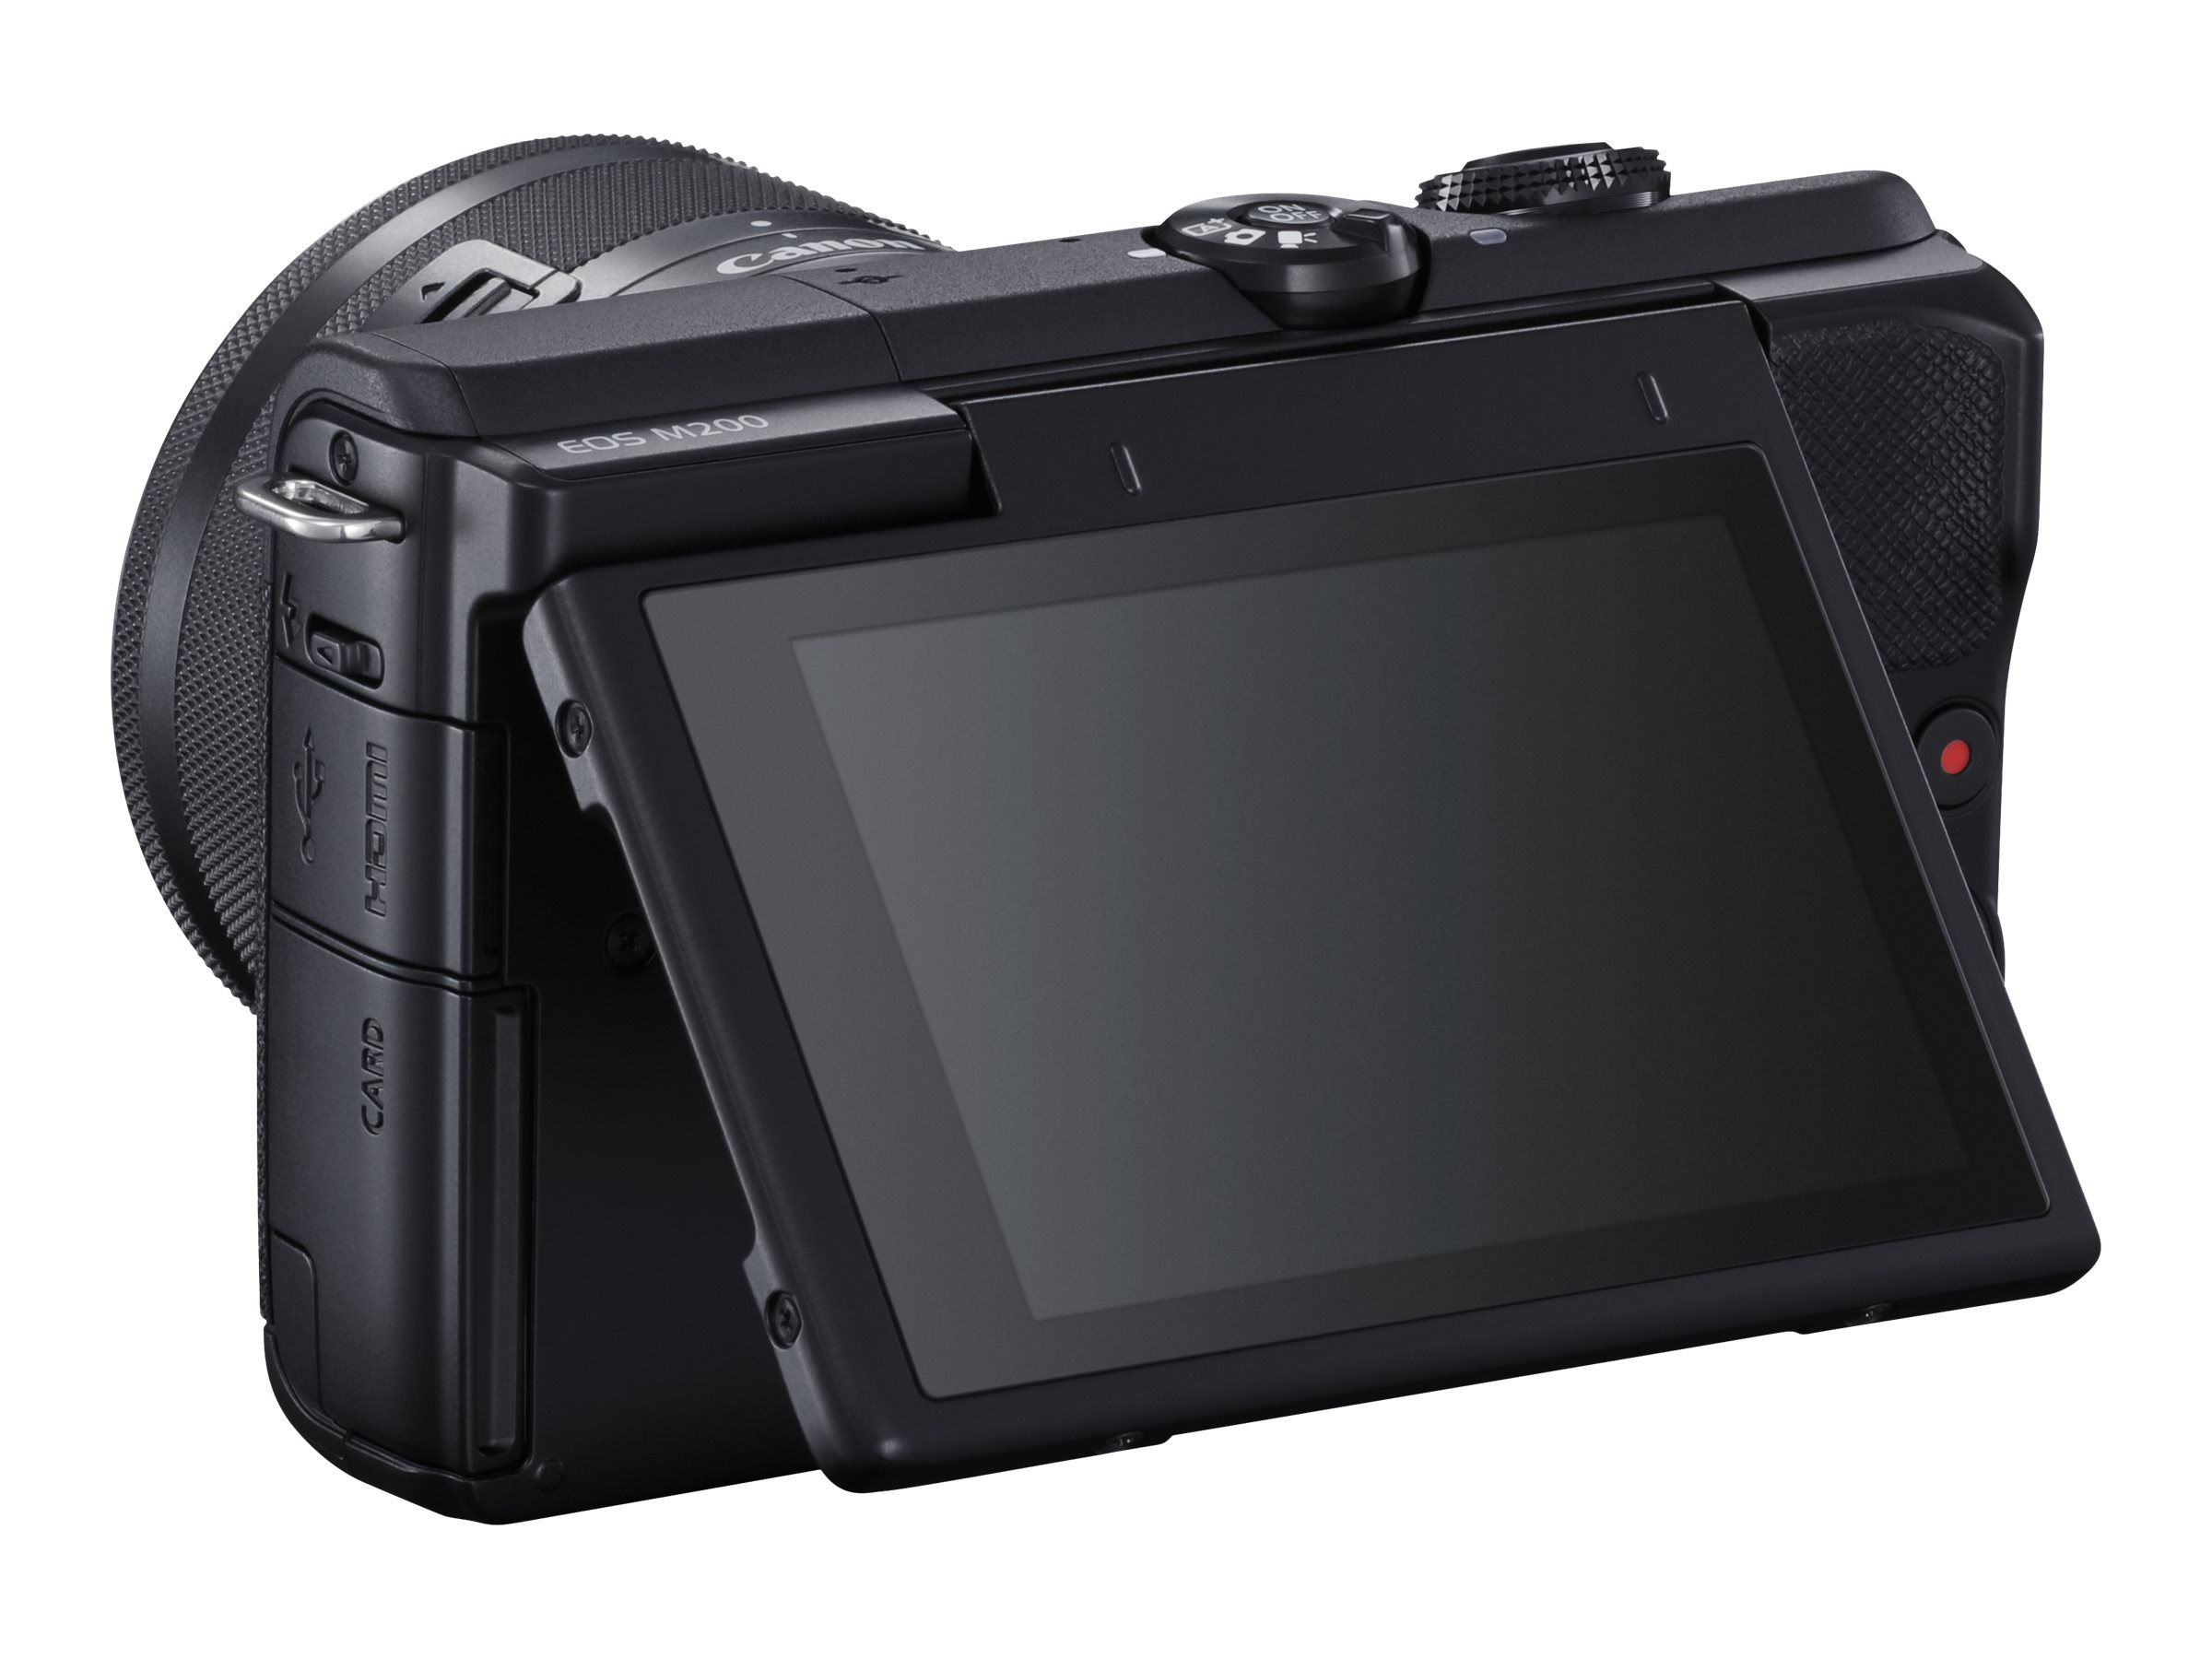 Canon EOS M200 - Digital camera - mirrorless - 24.1 MP - APS-C - 4K / 25 fps - 3x optical zoom EF-M 15-45mm IS STM lens - Wi-Fi, Bluetooth - black - image 2 of 3